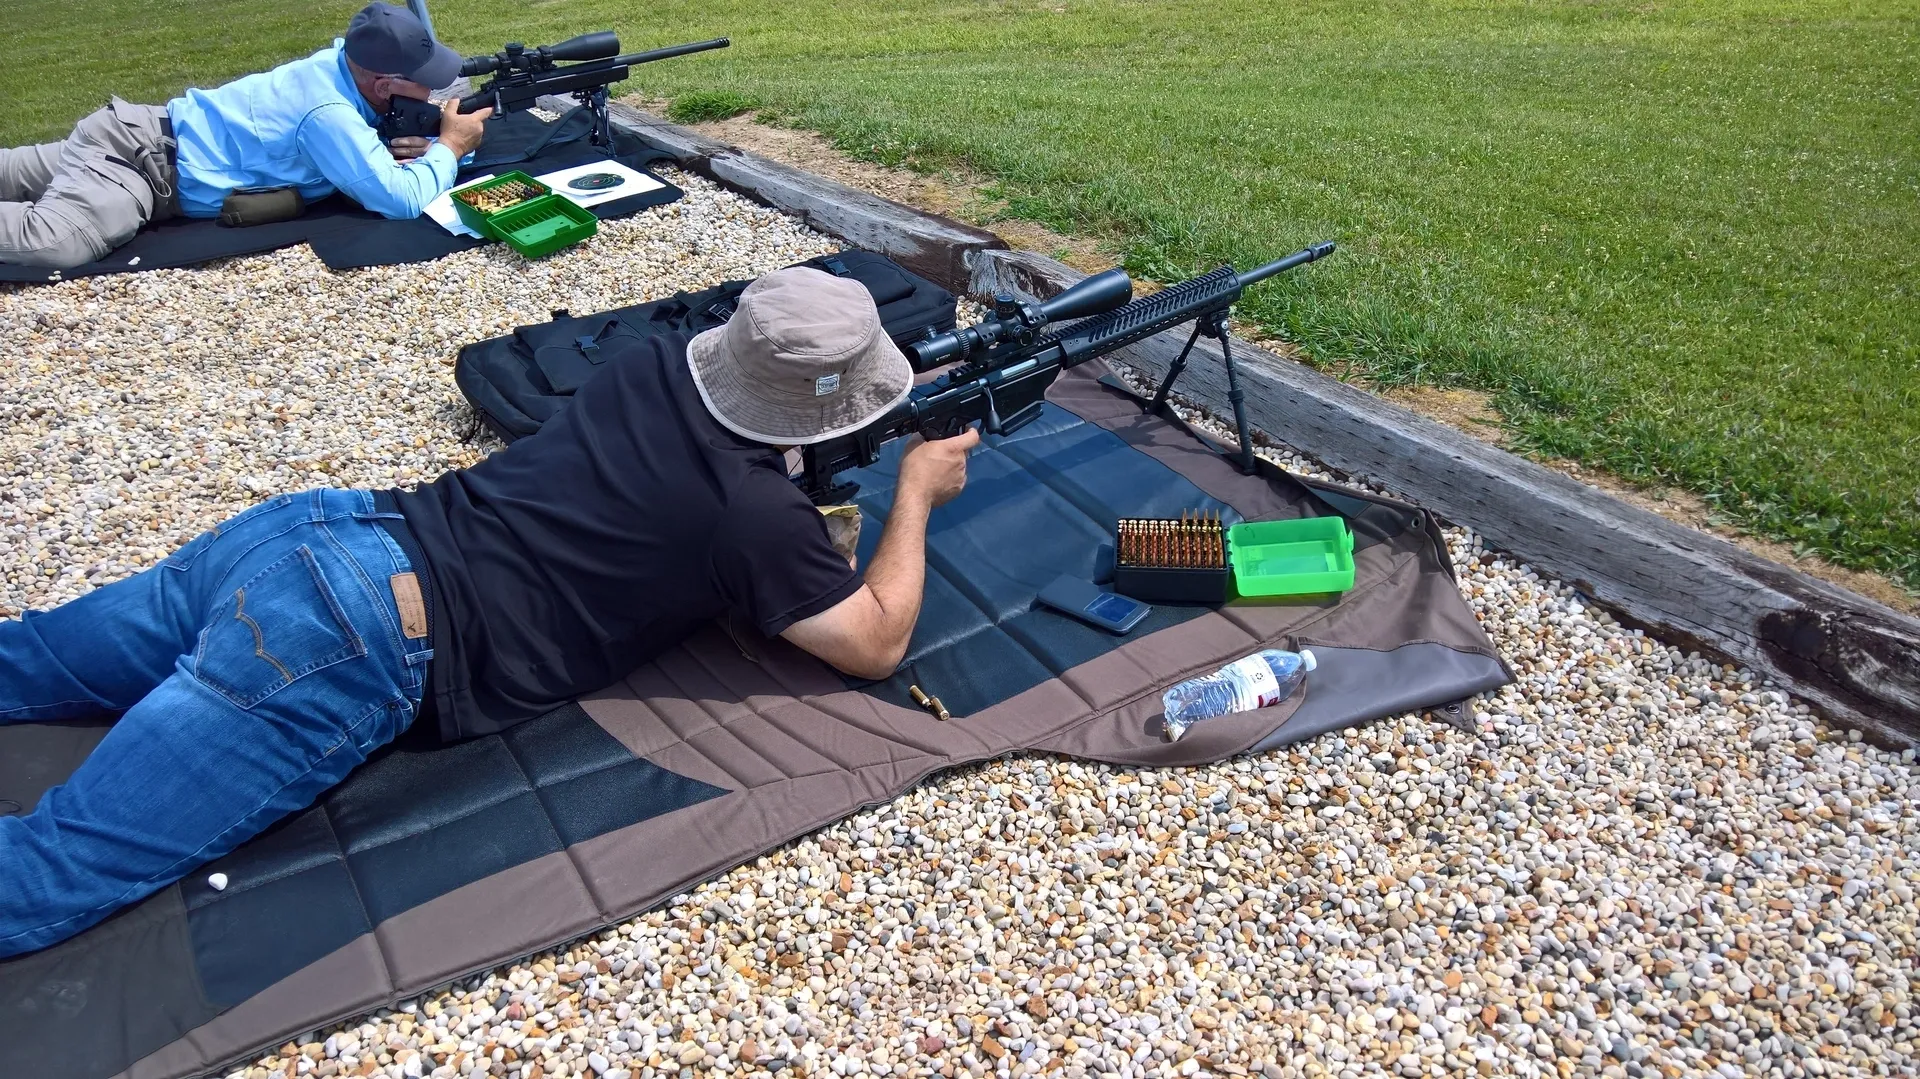 A man laying on the ground with a rifle.